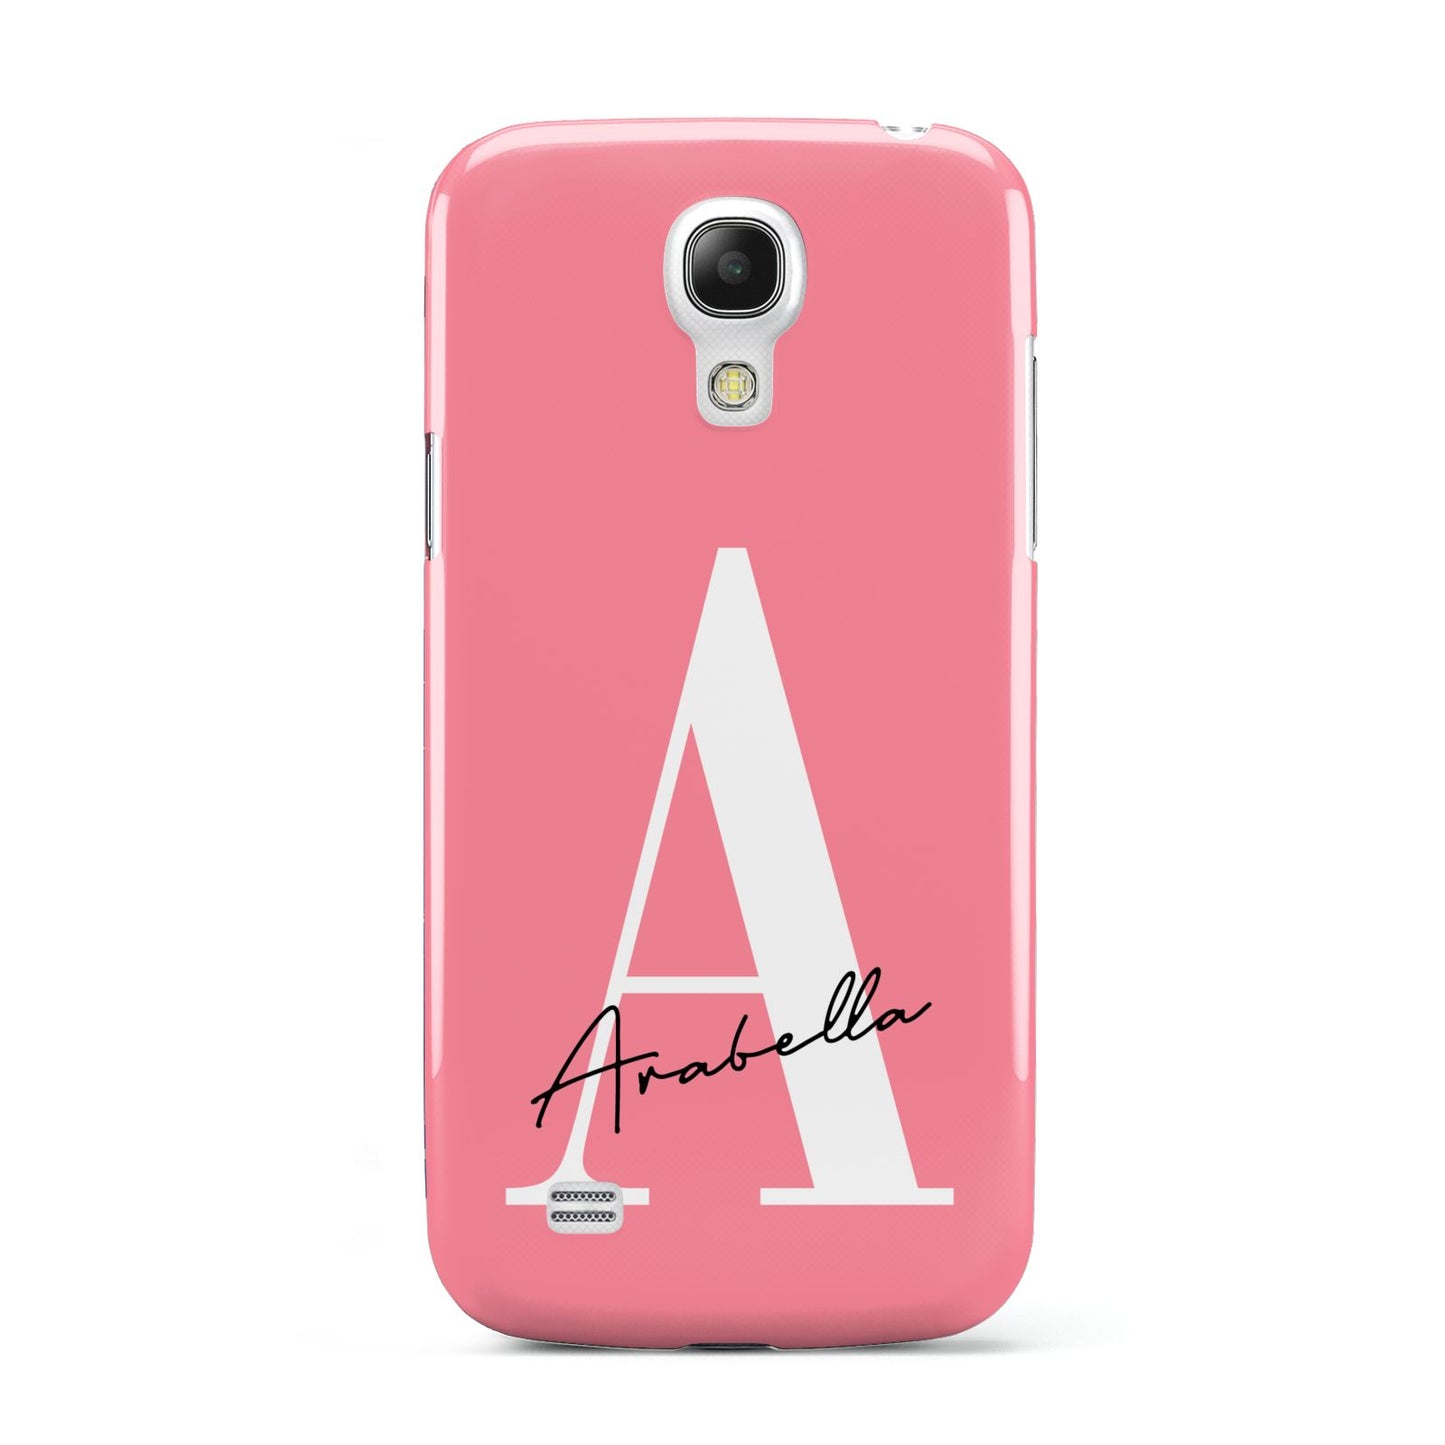 Personalised Pink White Initial Samsung Galaxy S4 Mini Case